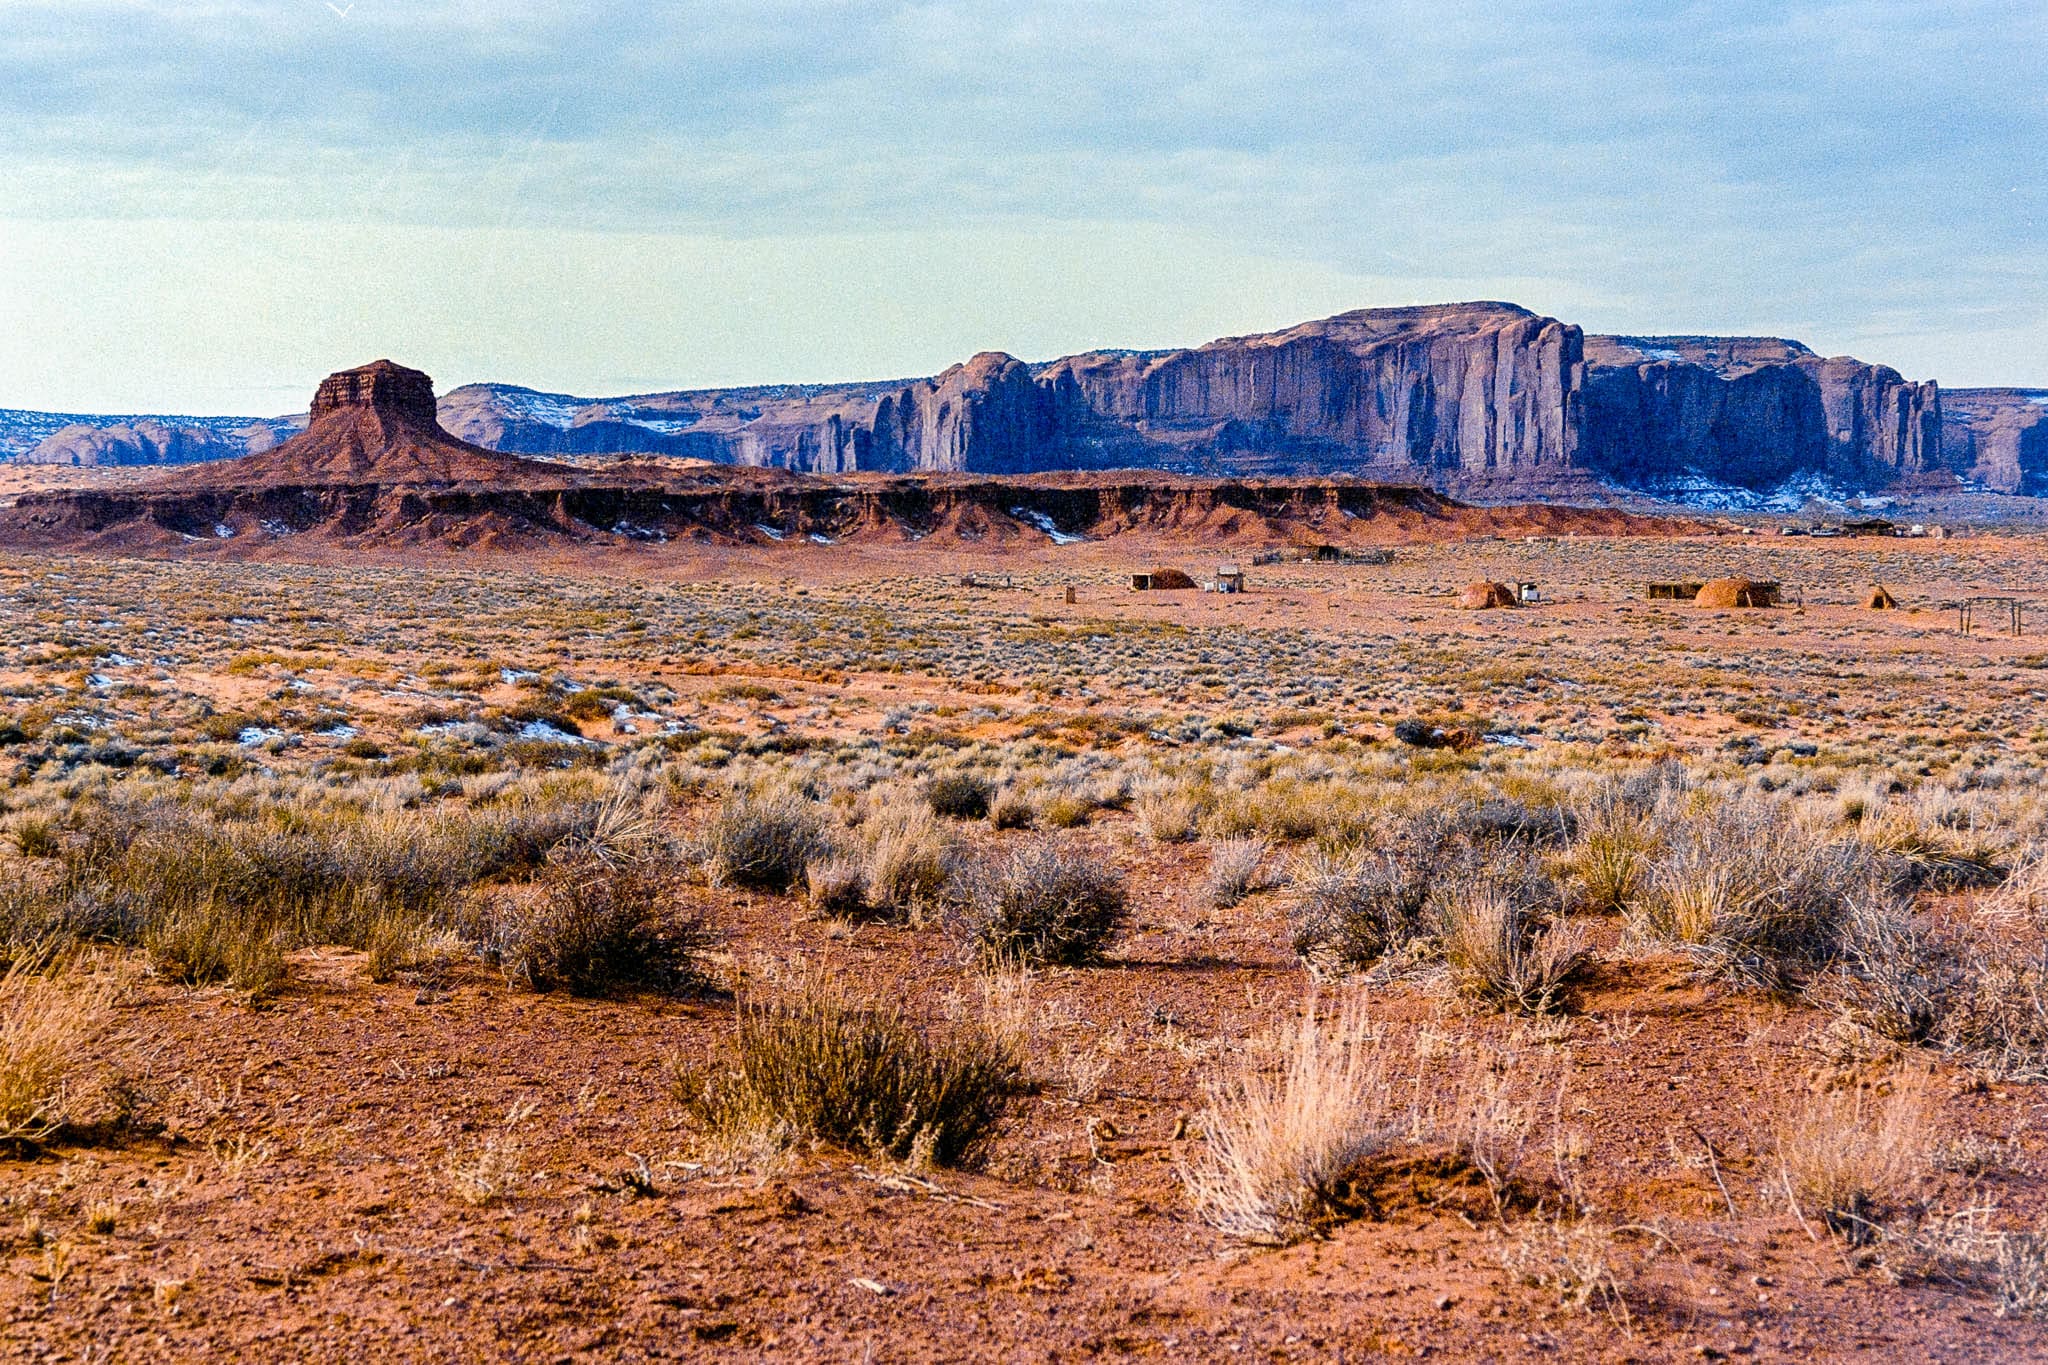 Serene yet harsh beauty of a desert landscape with dry vegetation and striking rock formations.